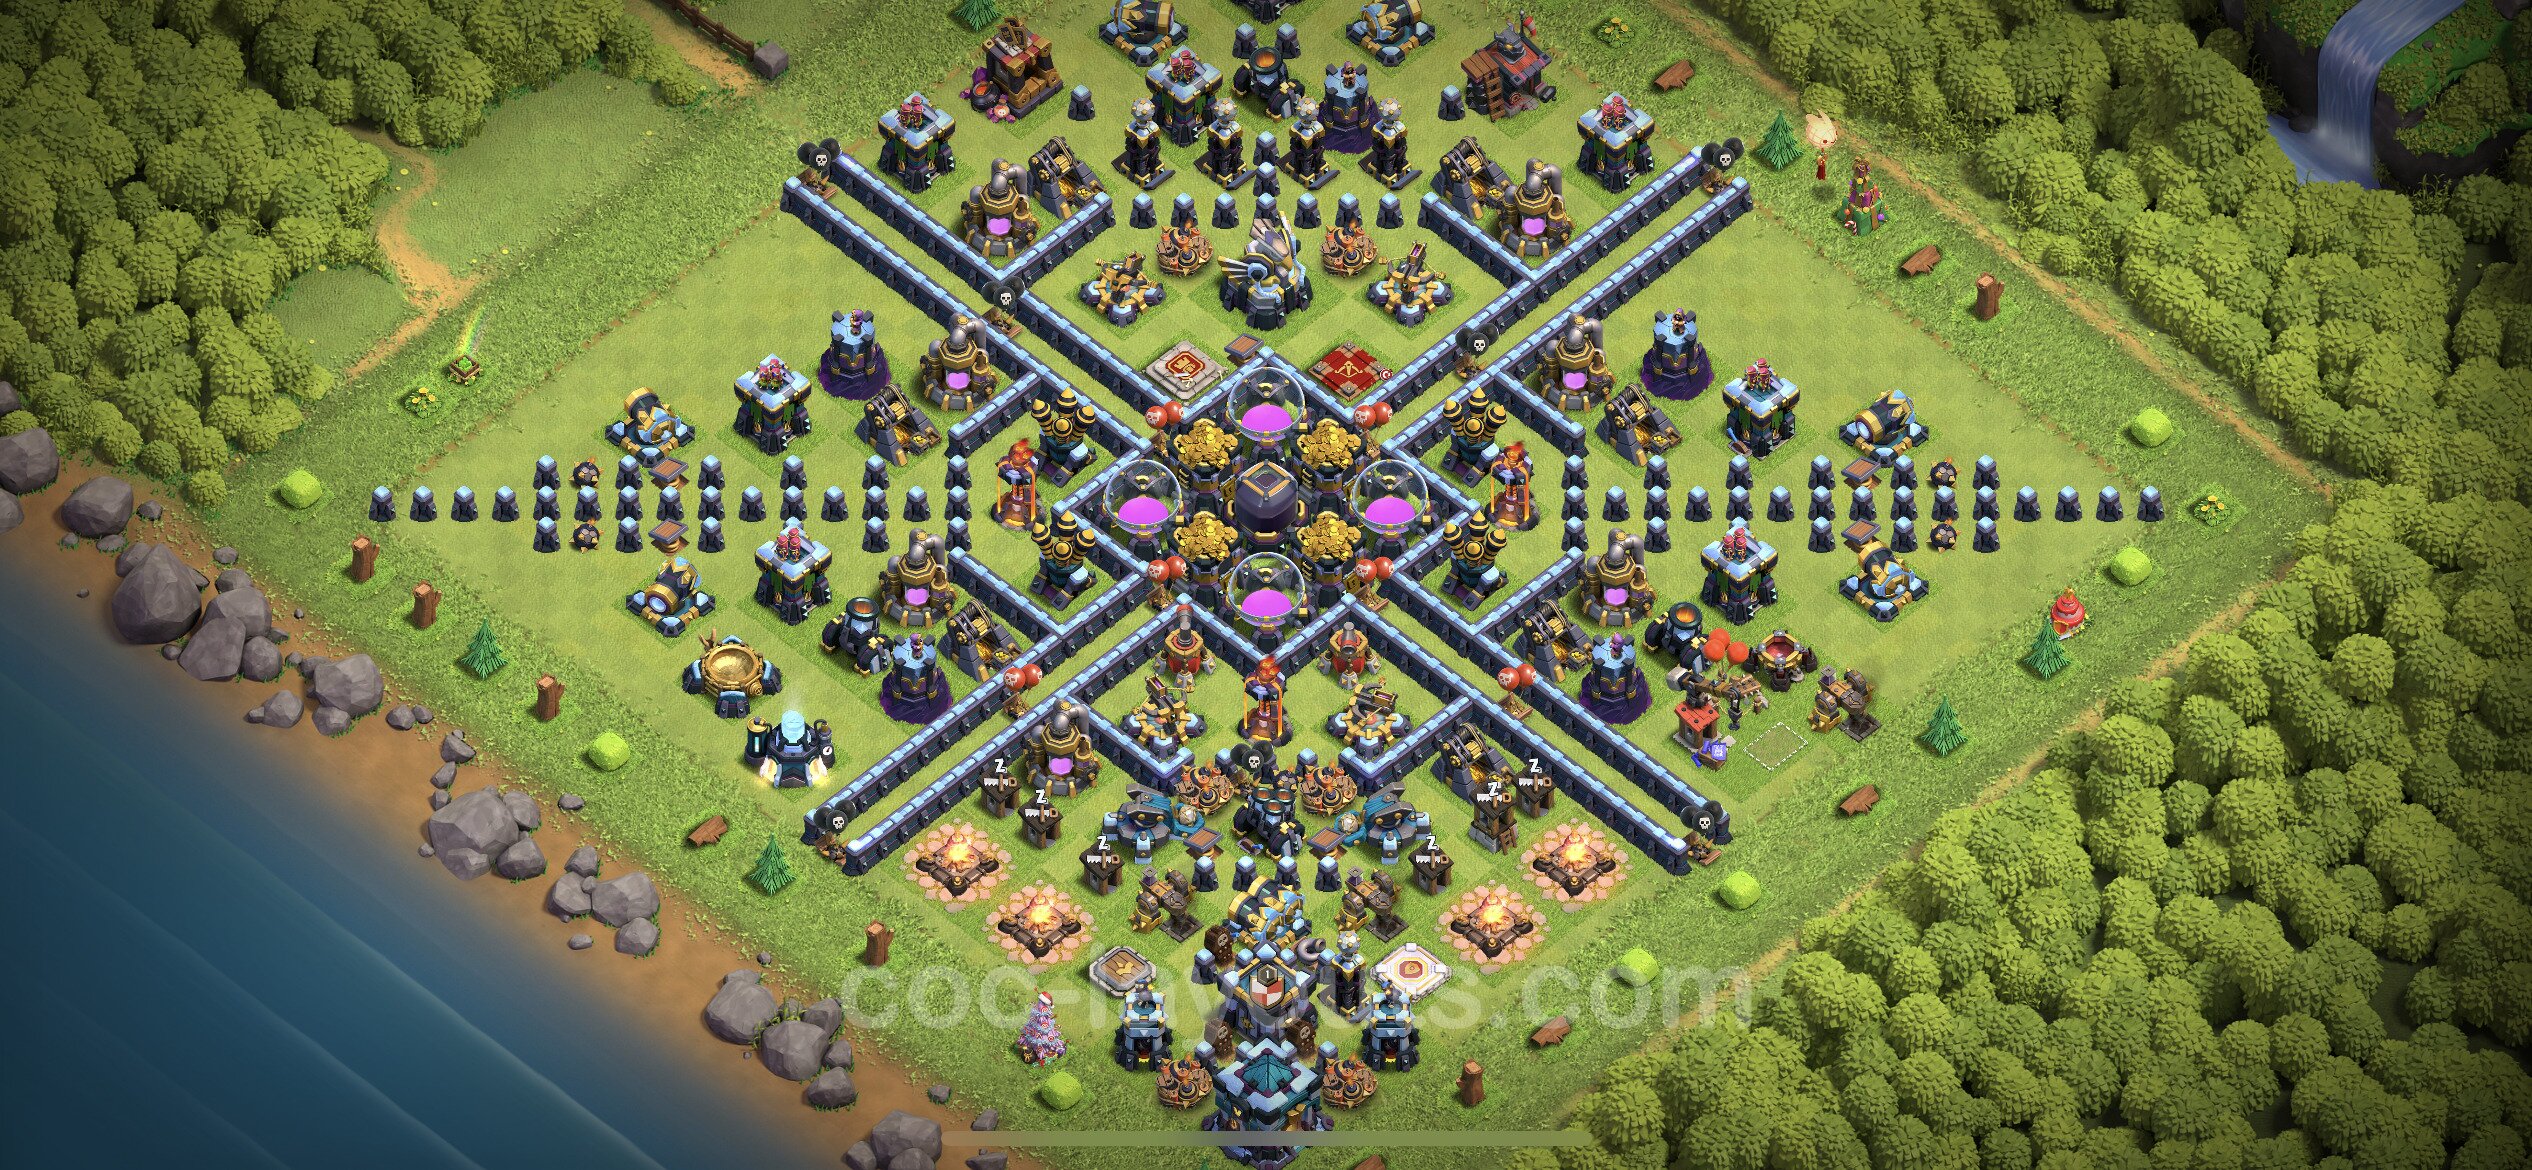 Farming Base TH13 with Link - Clash of Clans - Town Hall Lev